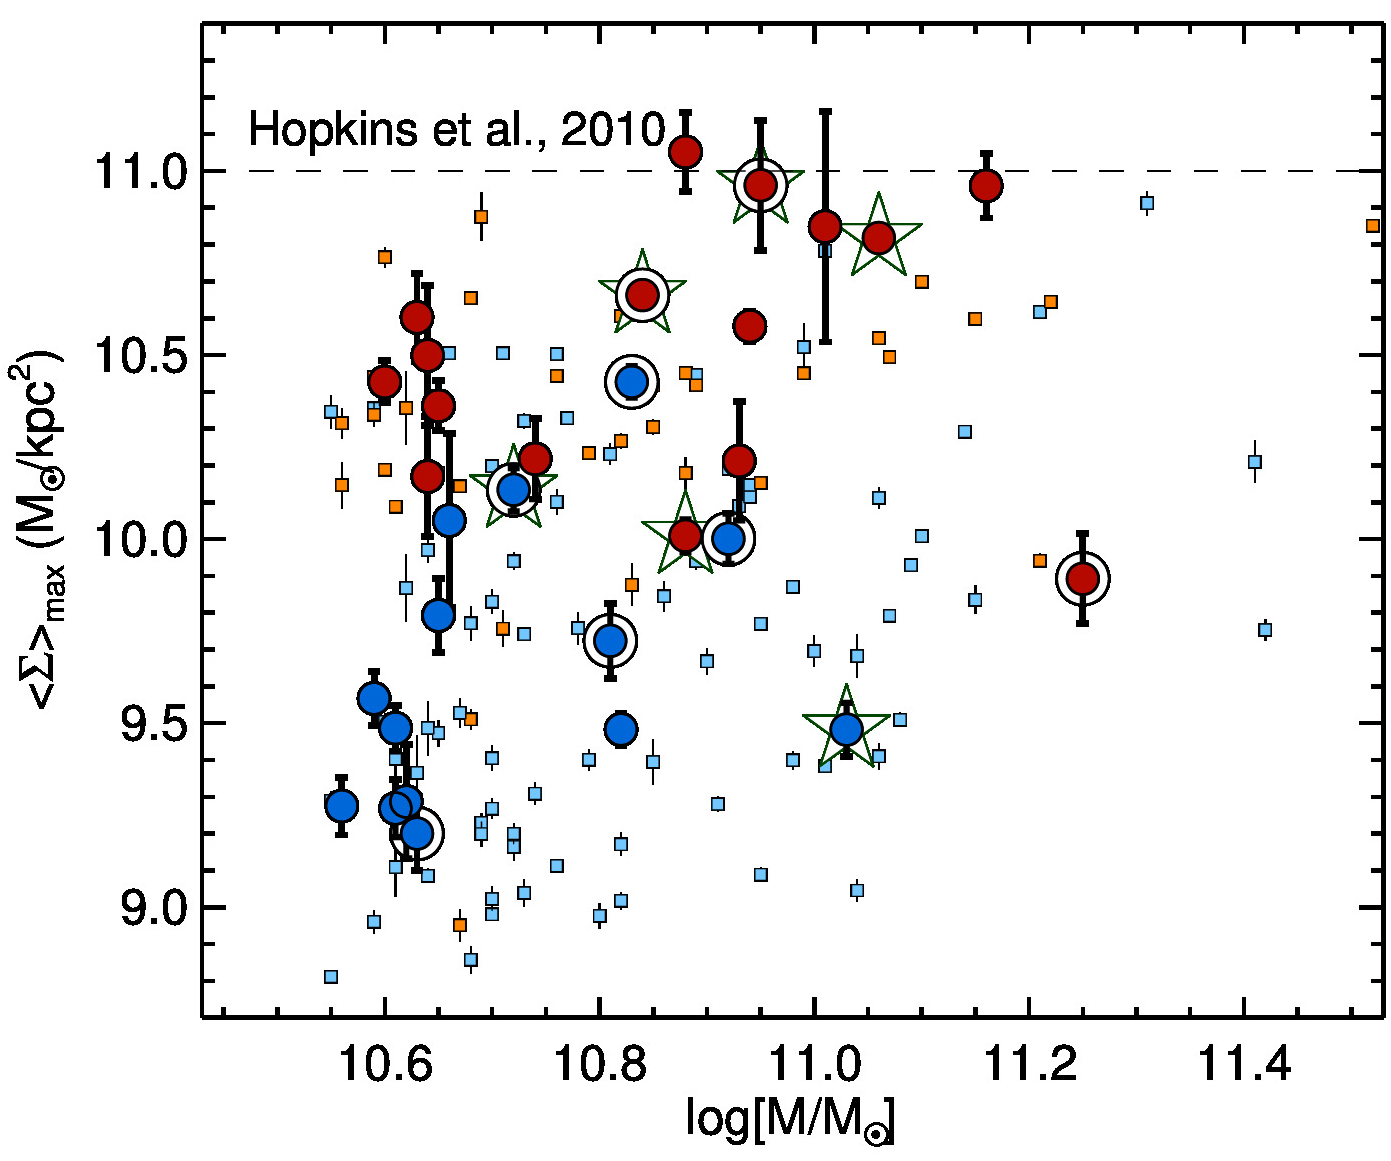 The quiescent galaxies have high stellar mass densities.